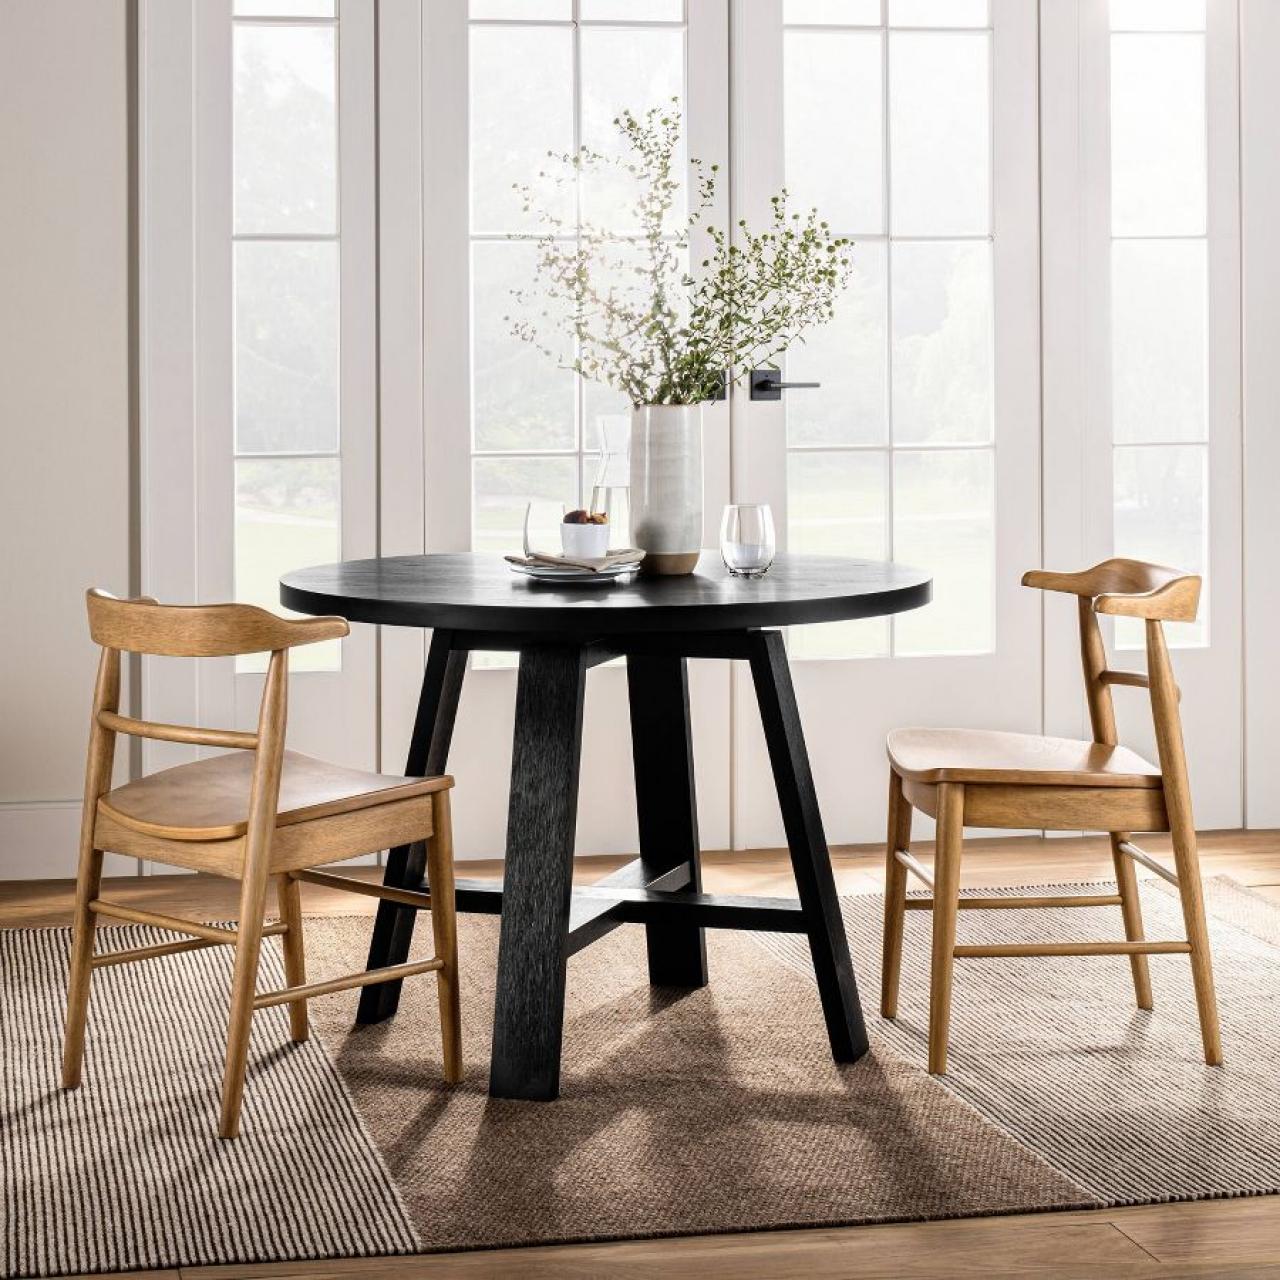 Economical rectangular table suitable for kitchen or living room